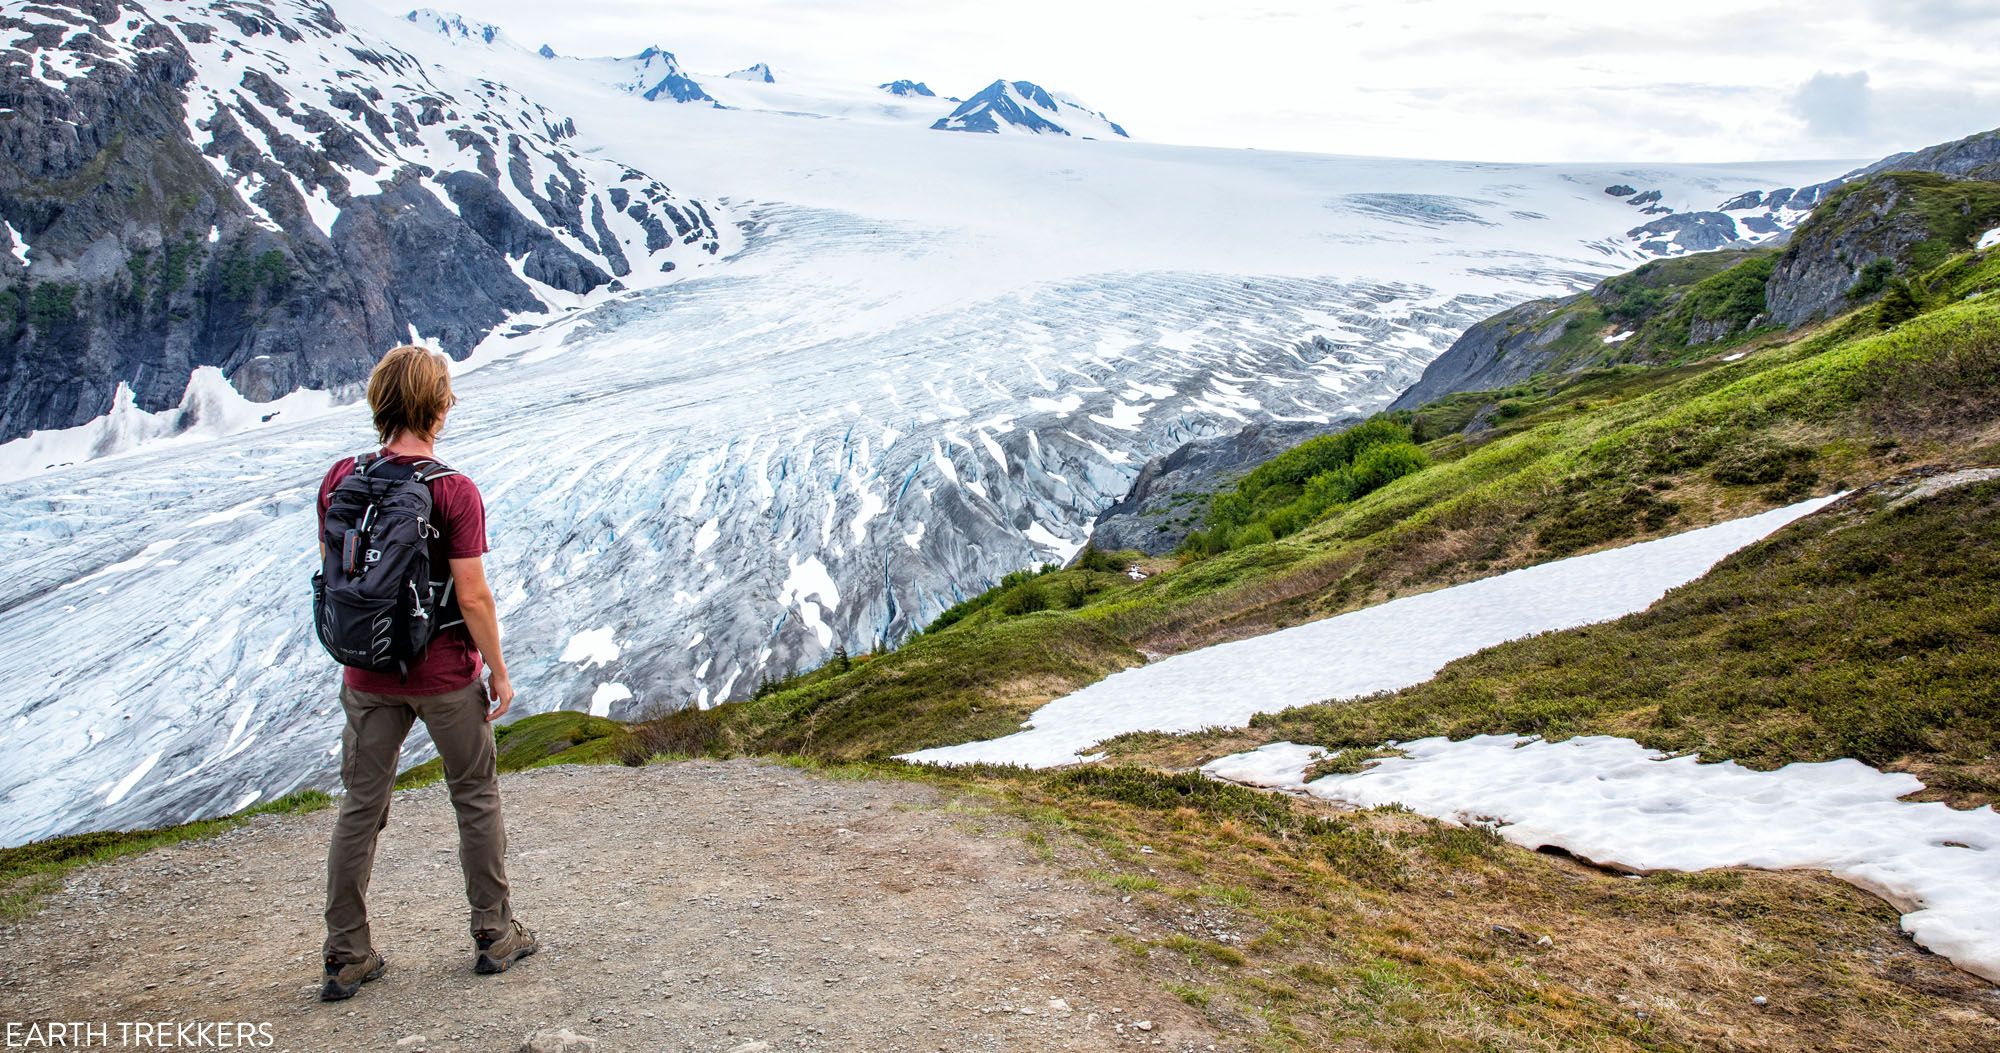 Featured image for “Harding Icefield Trail: The Ultimate Hiking Guide”